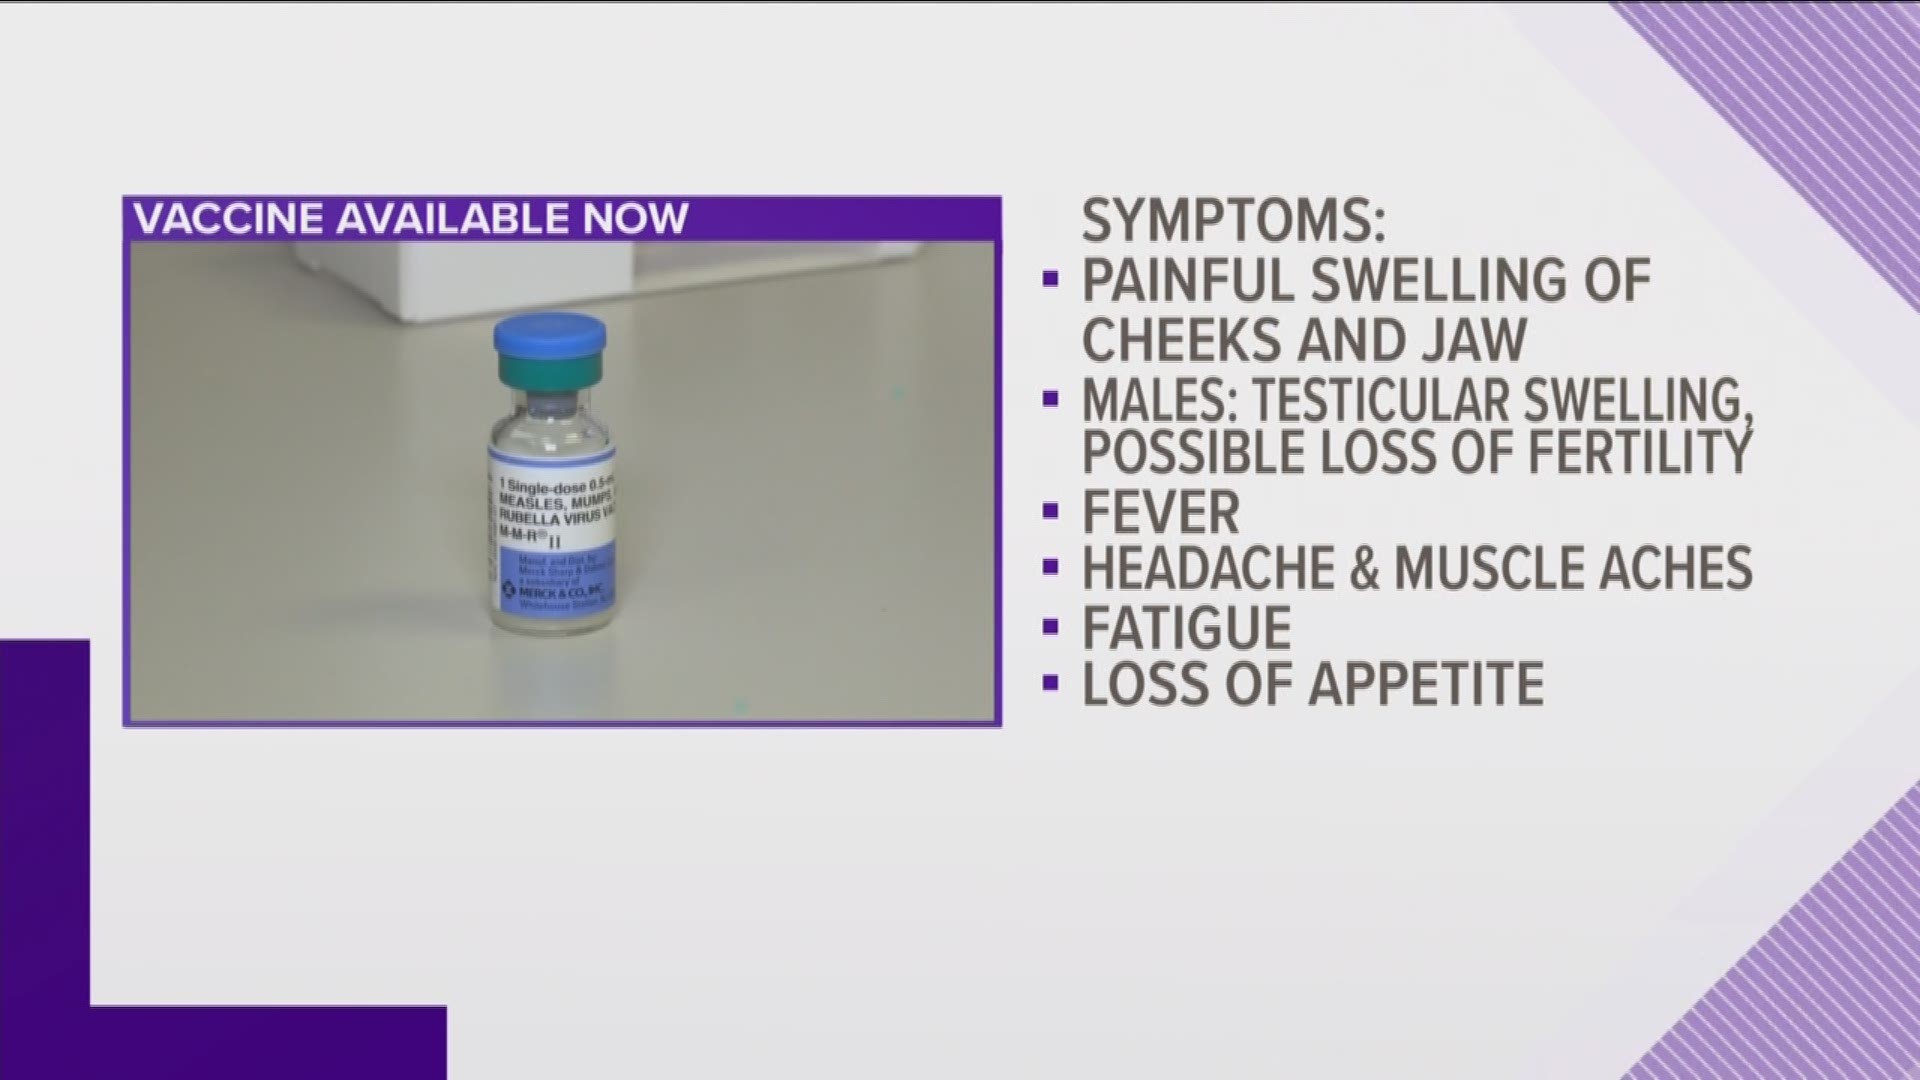 The Arkansas Department of Health (ADH) has identified three confirmed cases and one suspected case of mumps on the University of Arkansas at Fayetteville campus in the last few weeks.